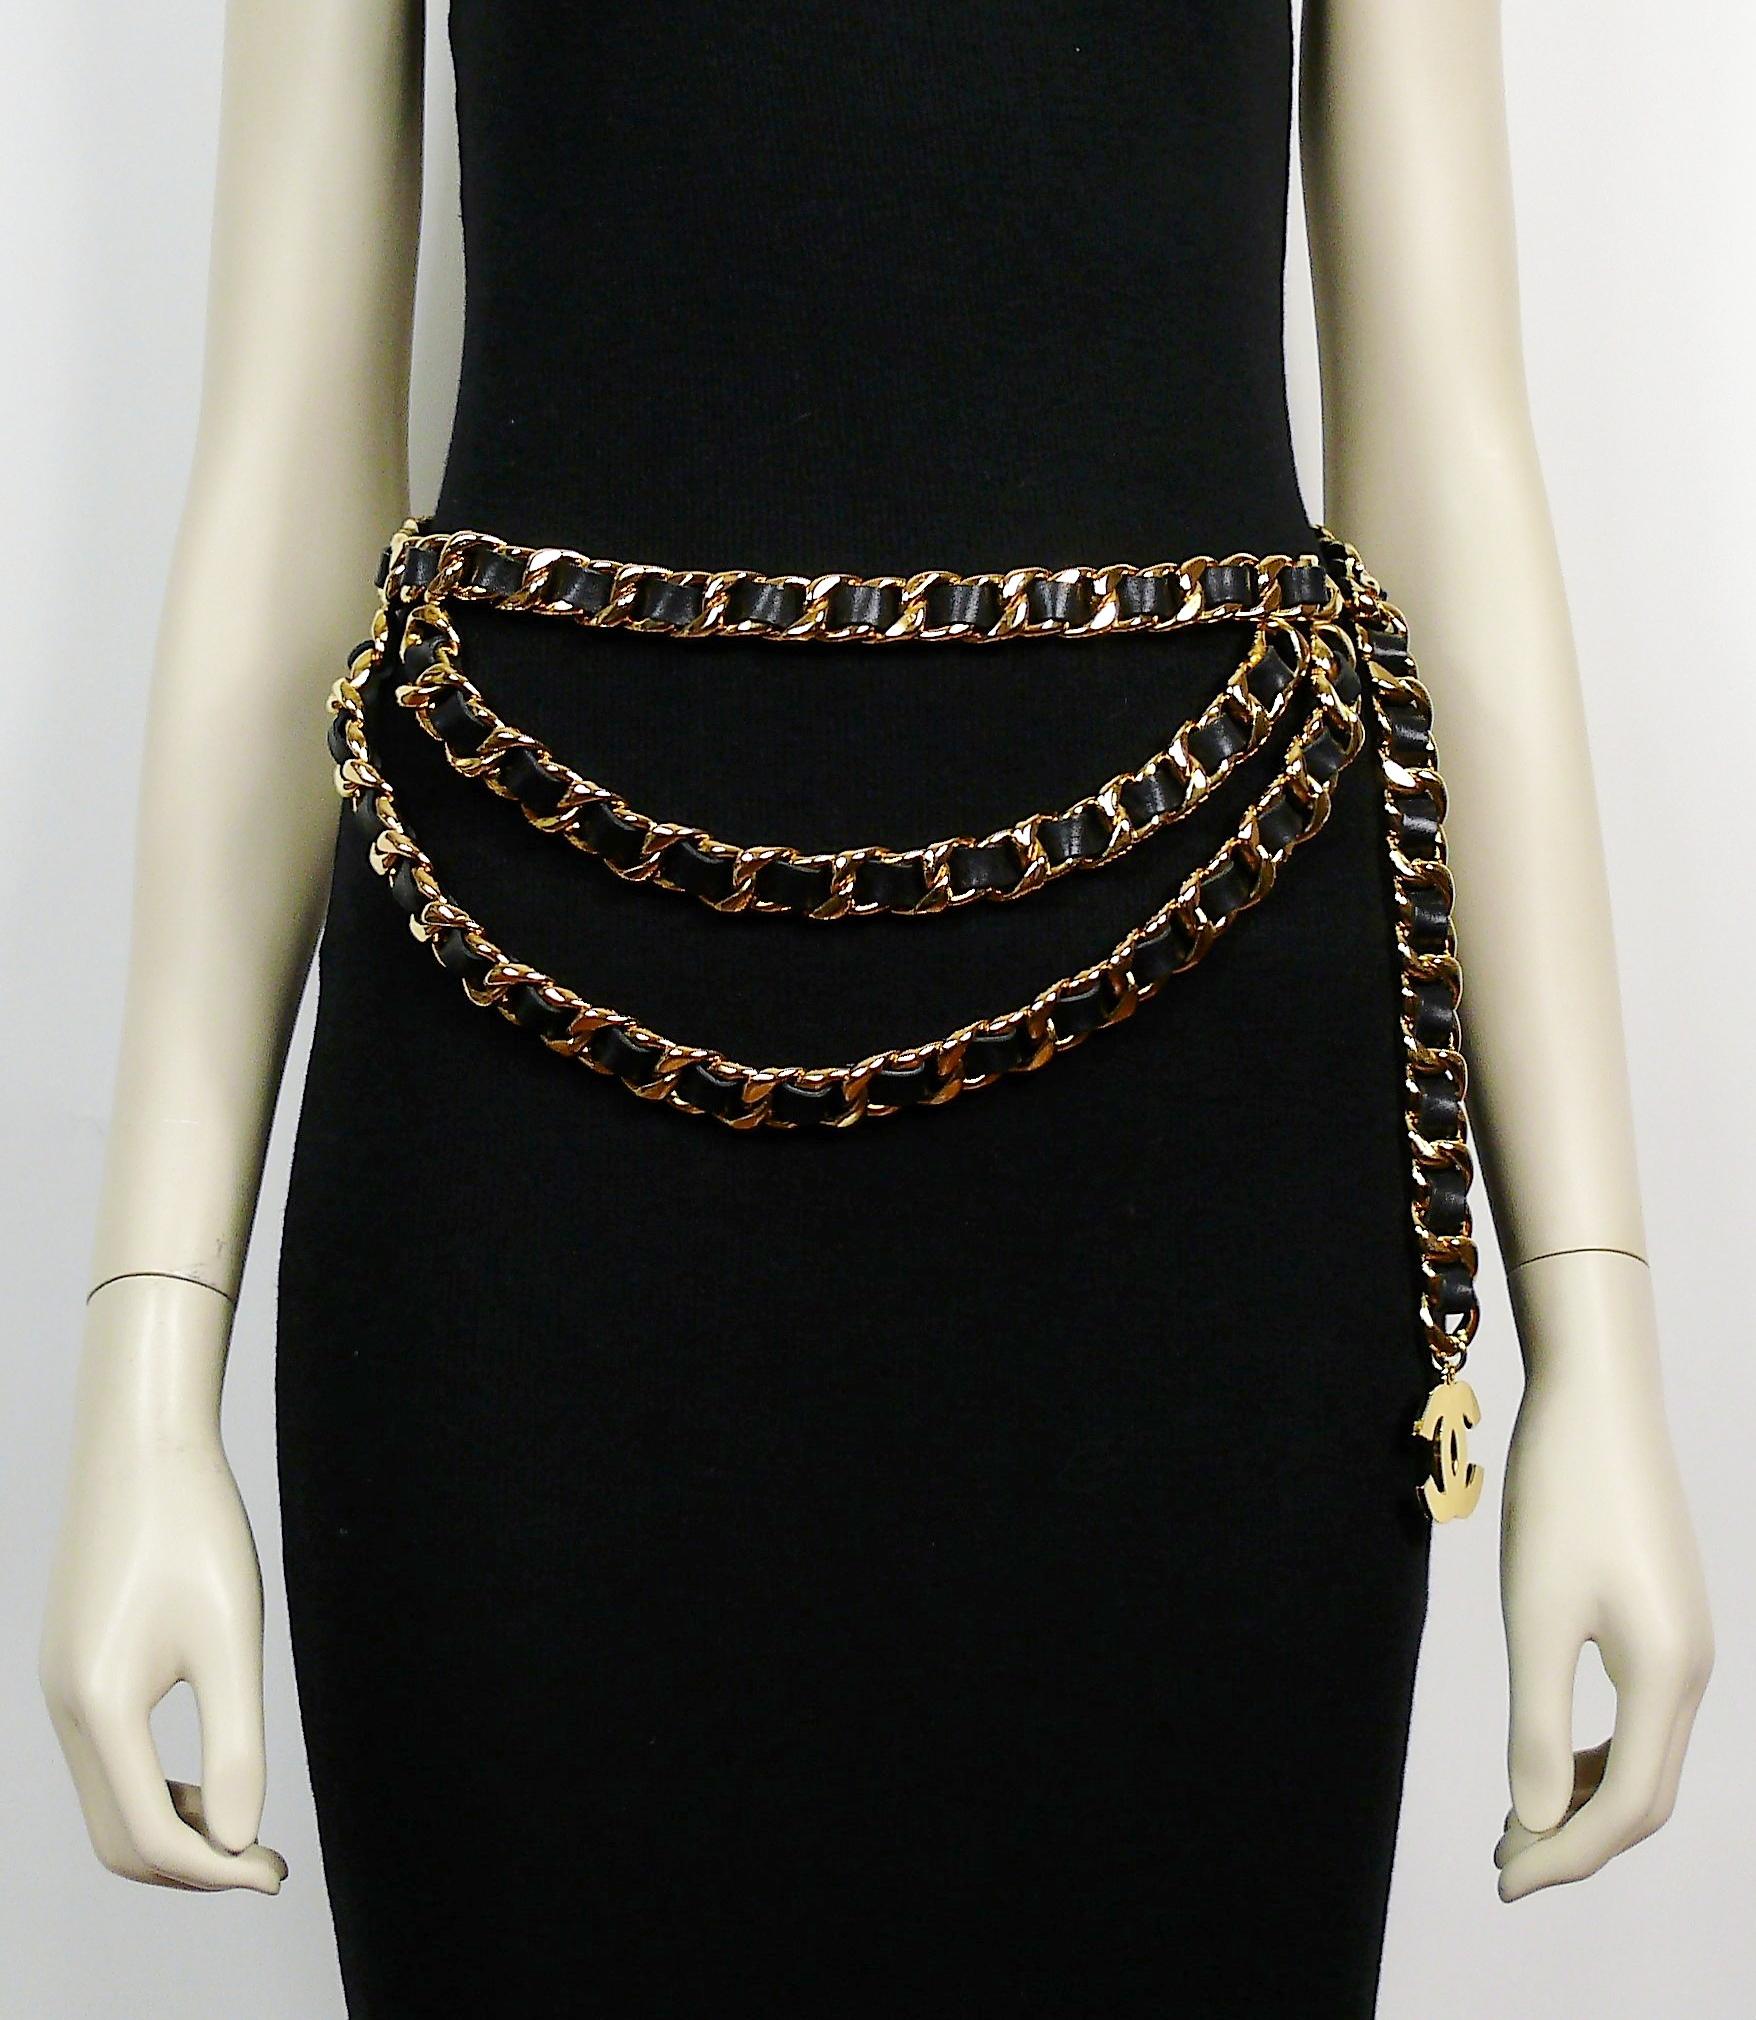 Black Chanel Vintage 1993 Gold Toned Chain and Leather Belt with Large CC Logo